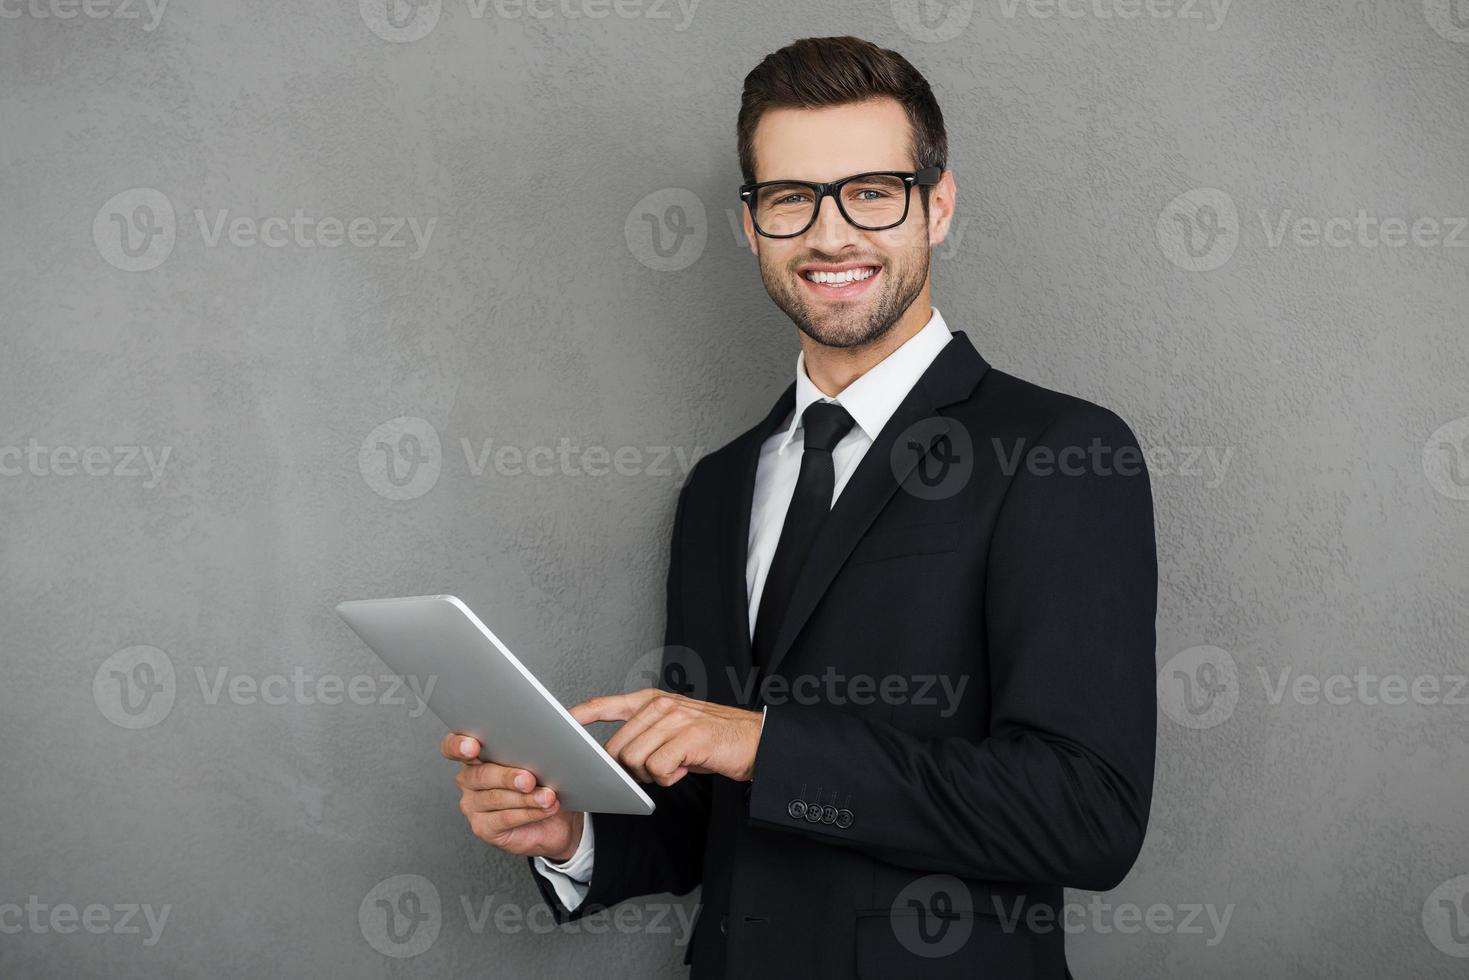 Doing his business in easy way. Happy young businessman holding digital tablet and looking at camera while standing against grey background photo